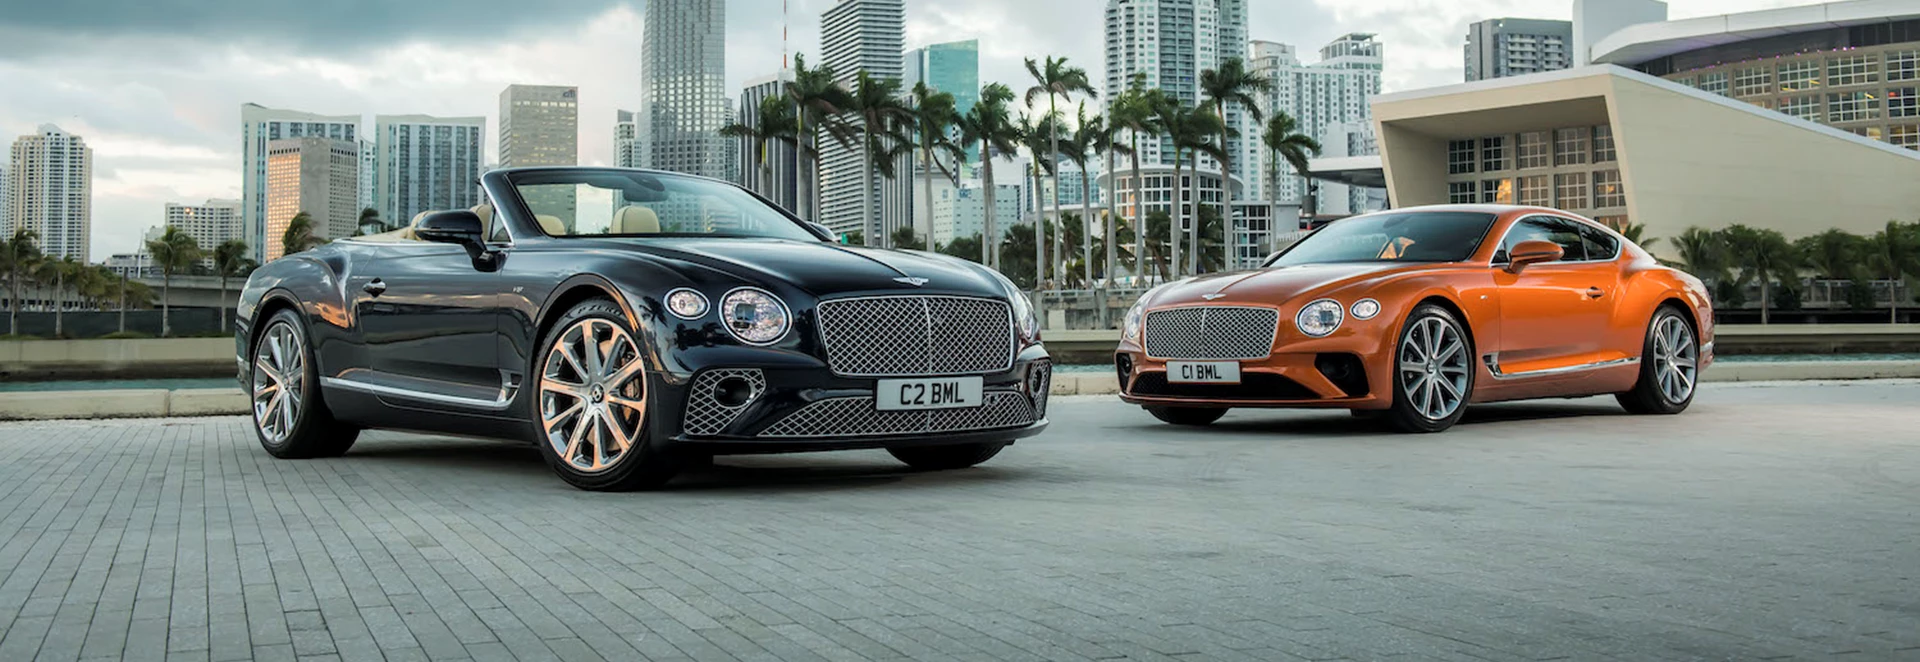 Bentley Continental GT V8 line-up unveiled 